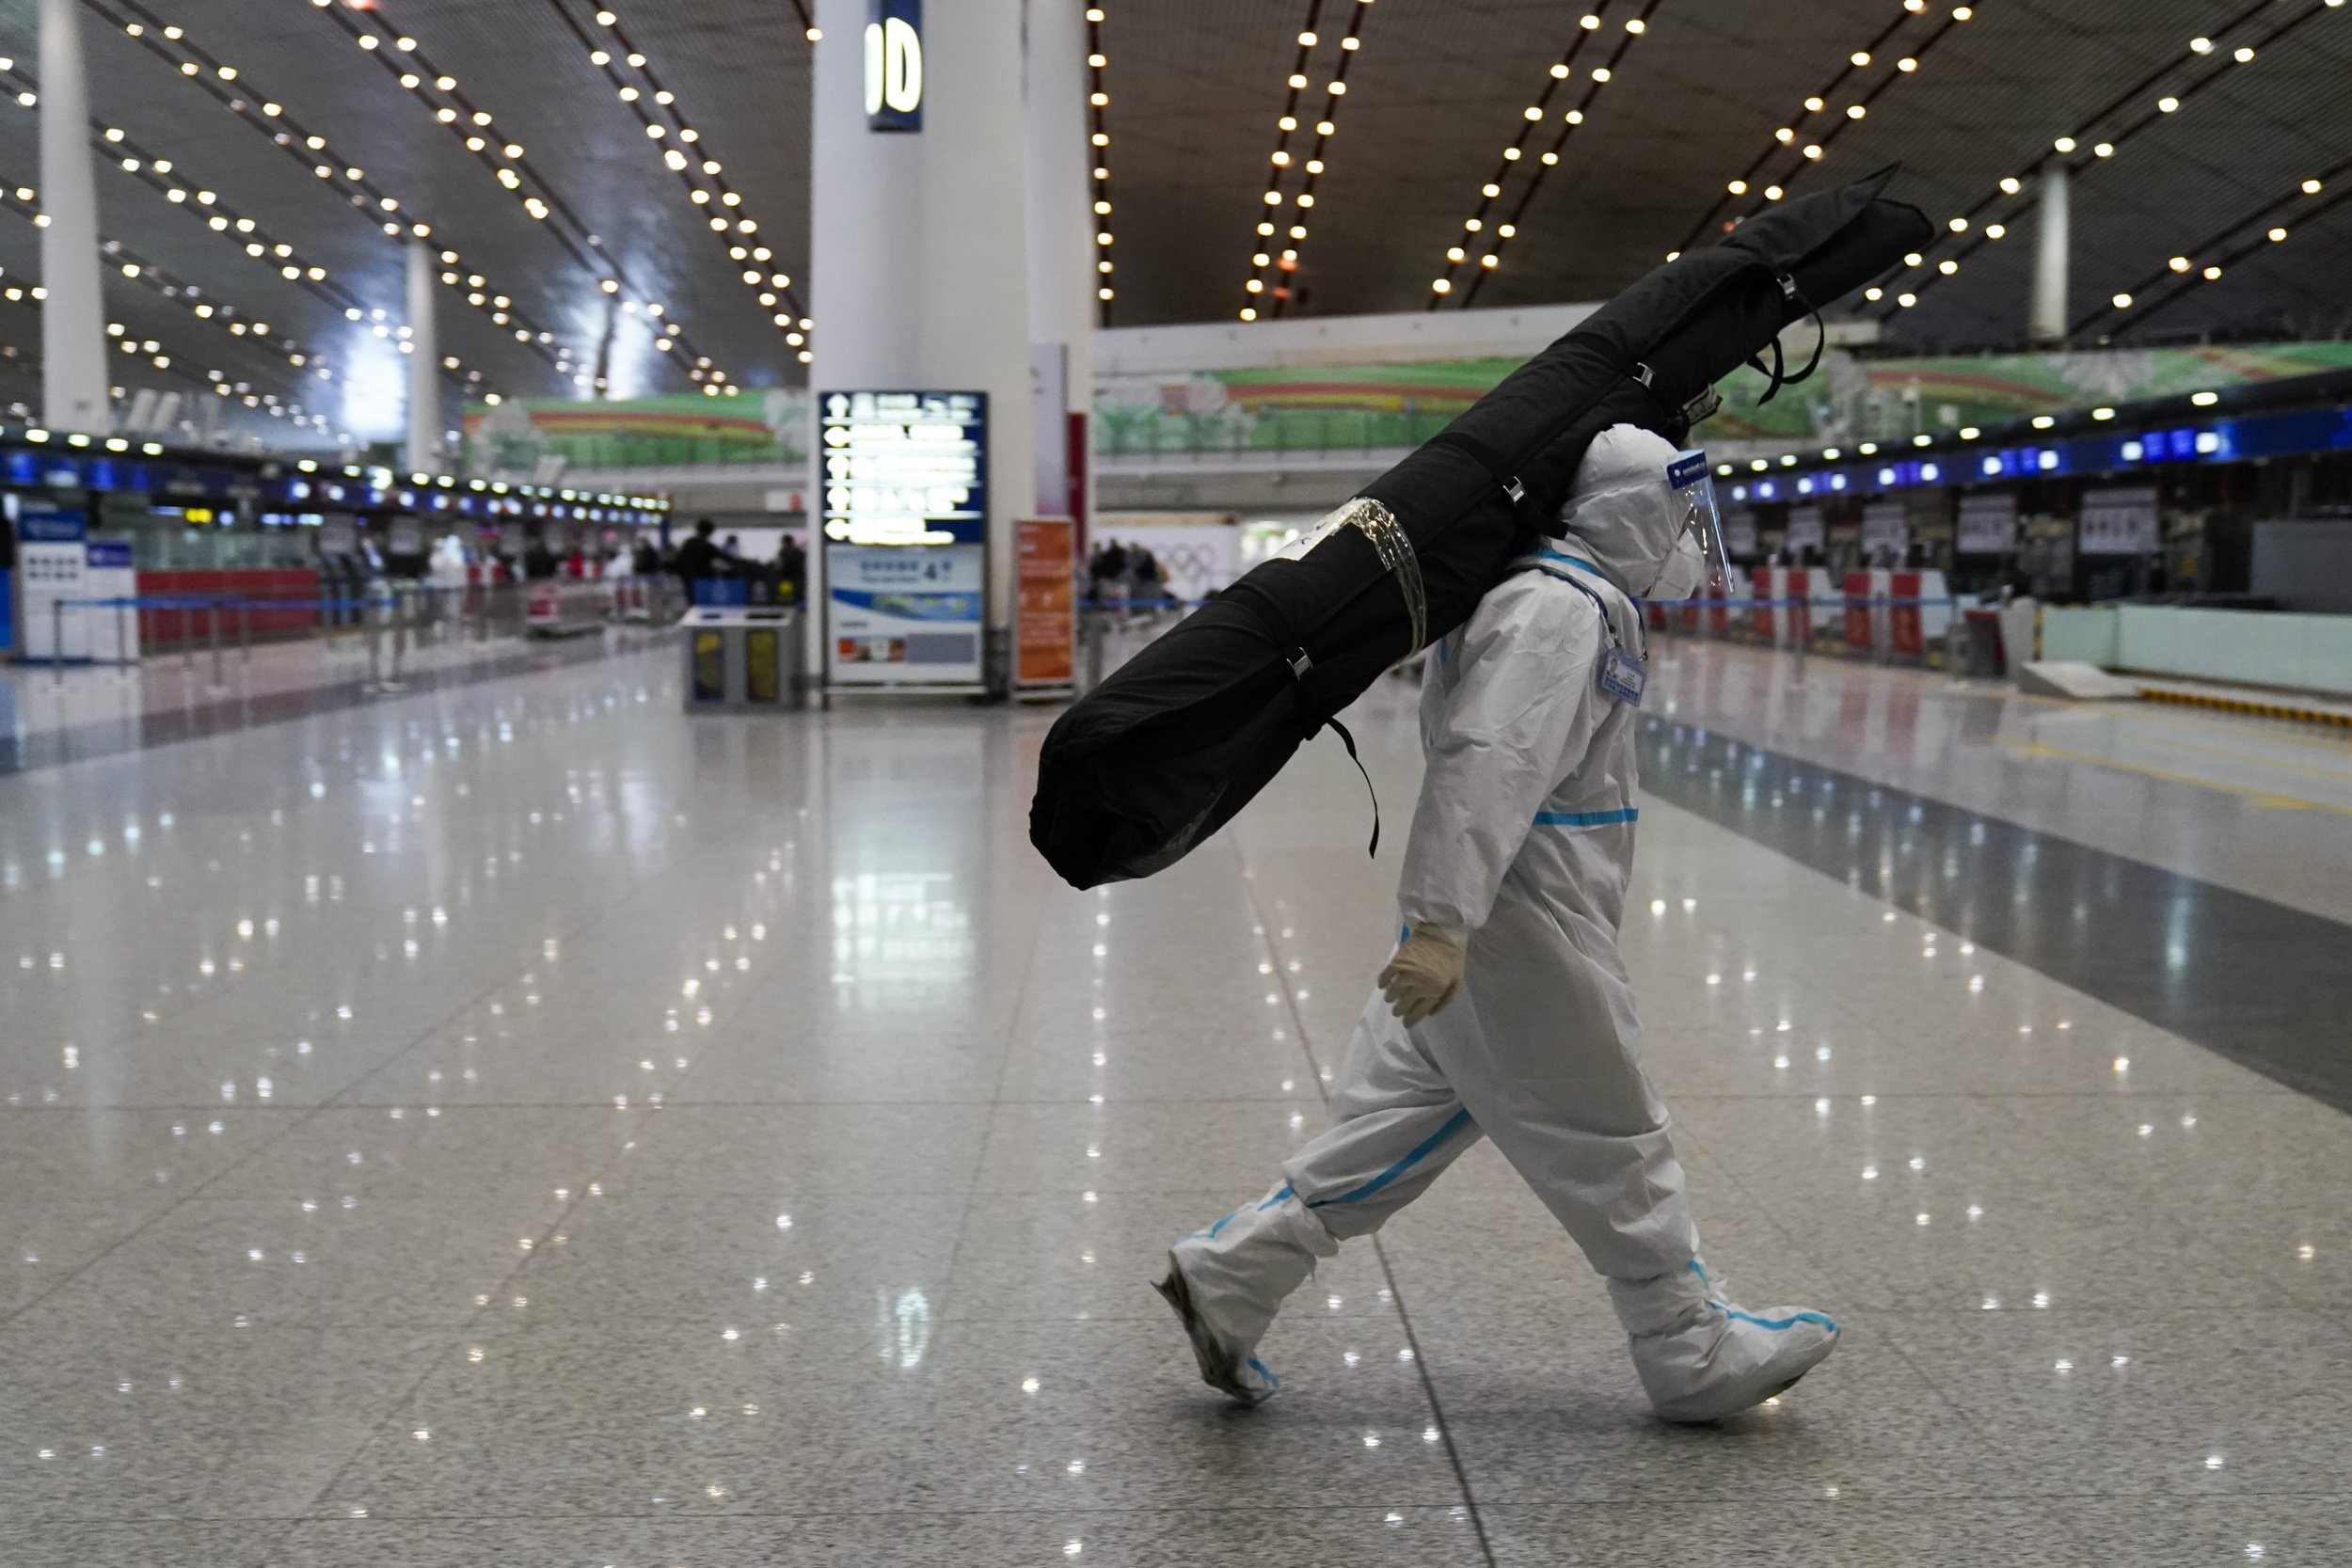  A volunteer carries a passenger's luggage at Beijing Capital International Airport after the 2022 Winter Olympics, Sunday, Feb. 20, 2022, in Beijing. (AP Photo/Ashley Landis) 